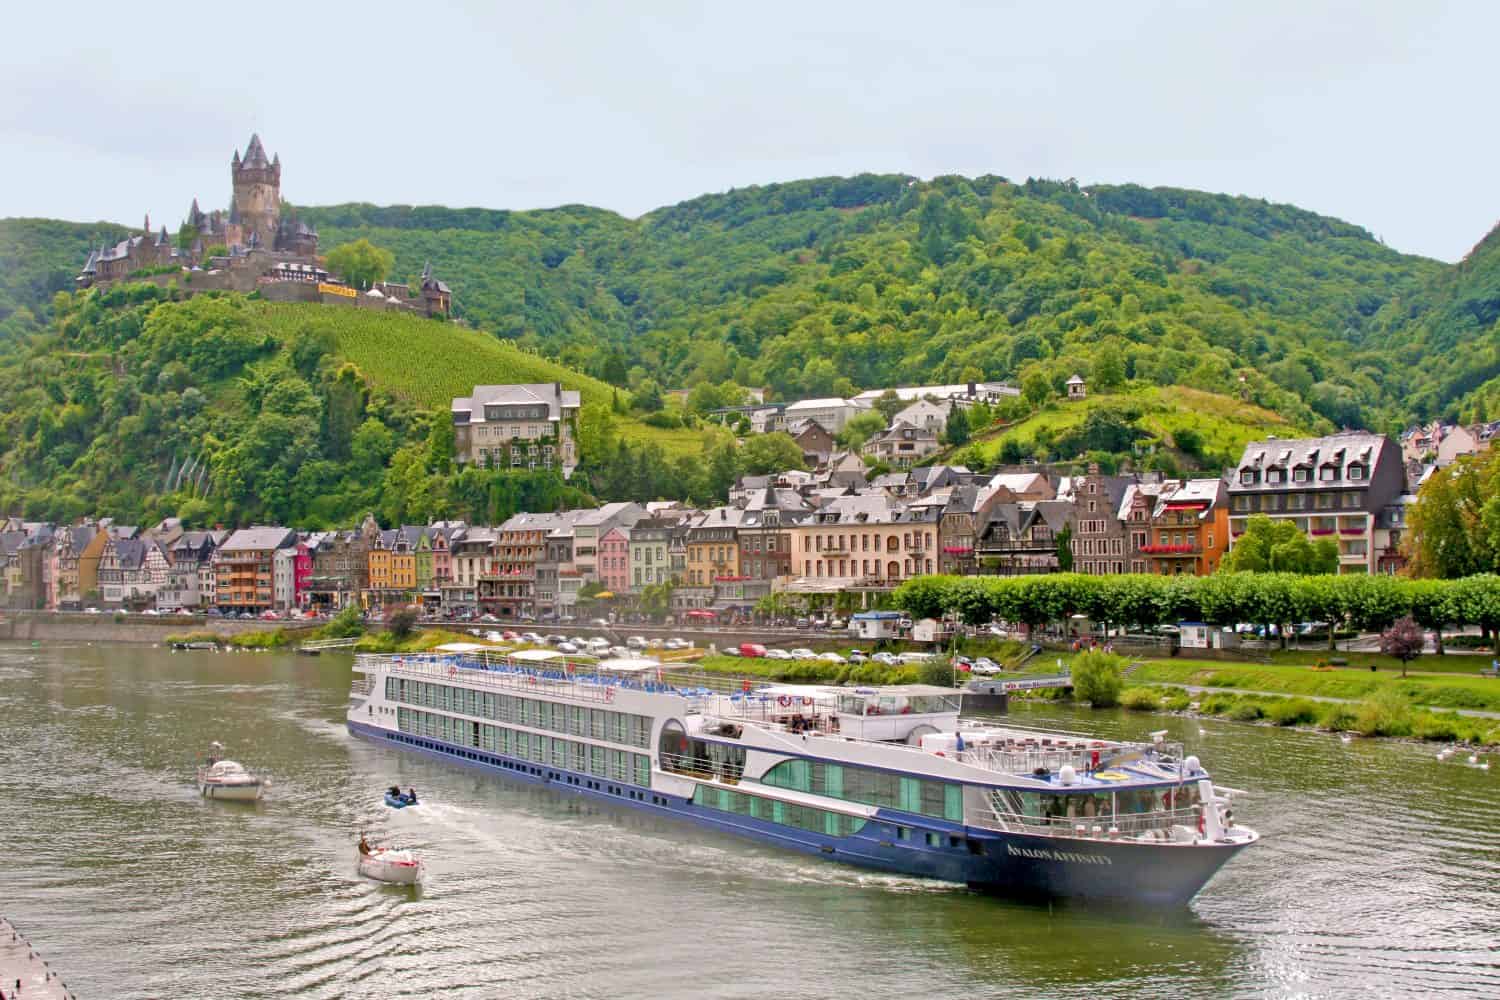 Avalon Waterways River Cruise sale of the year free airfare and